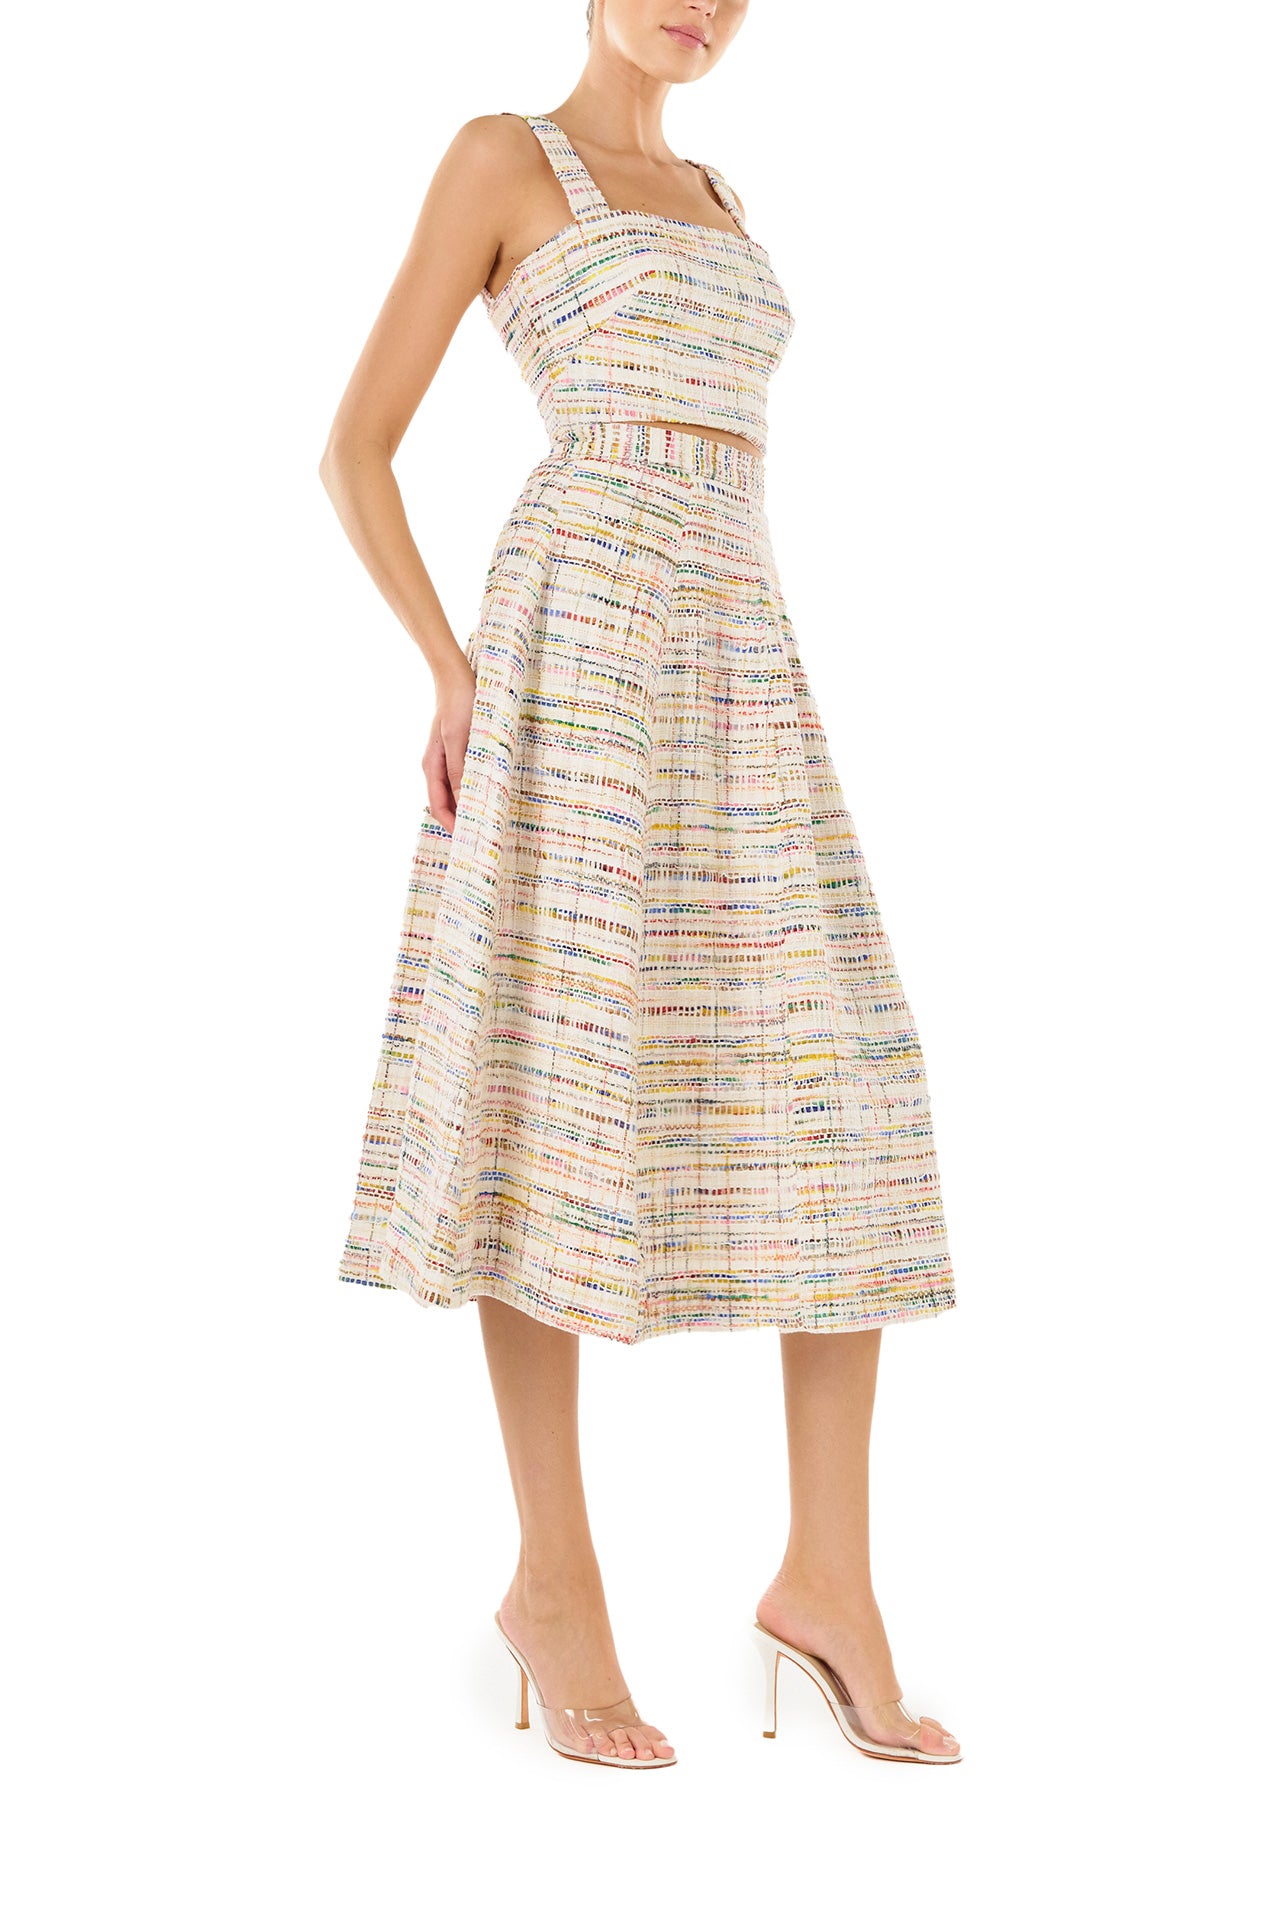 Monique Lhuillier Spring 2024 silk white multi tweed midi skirt and crop top - right side.